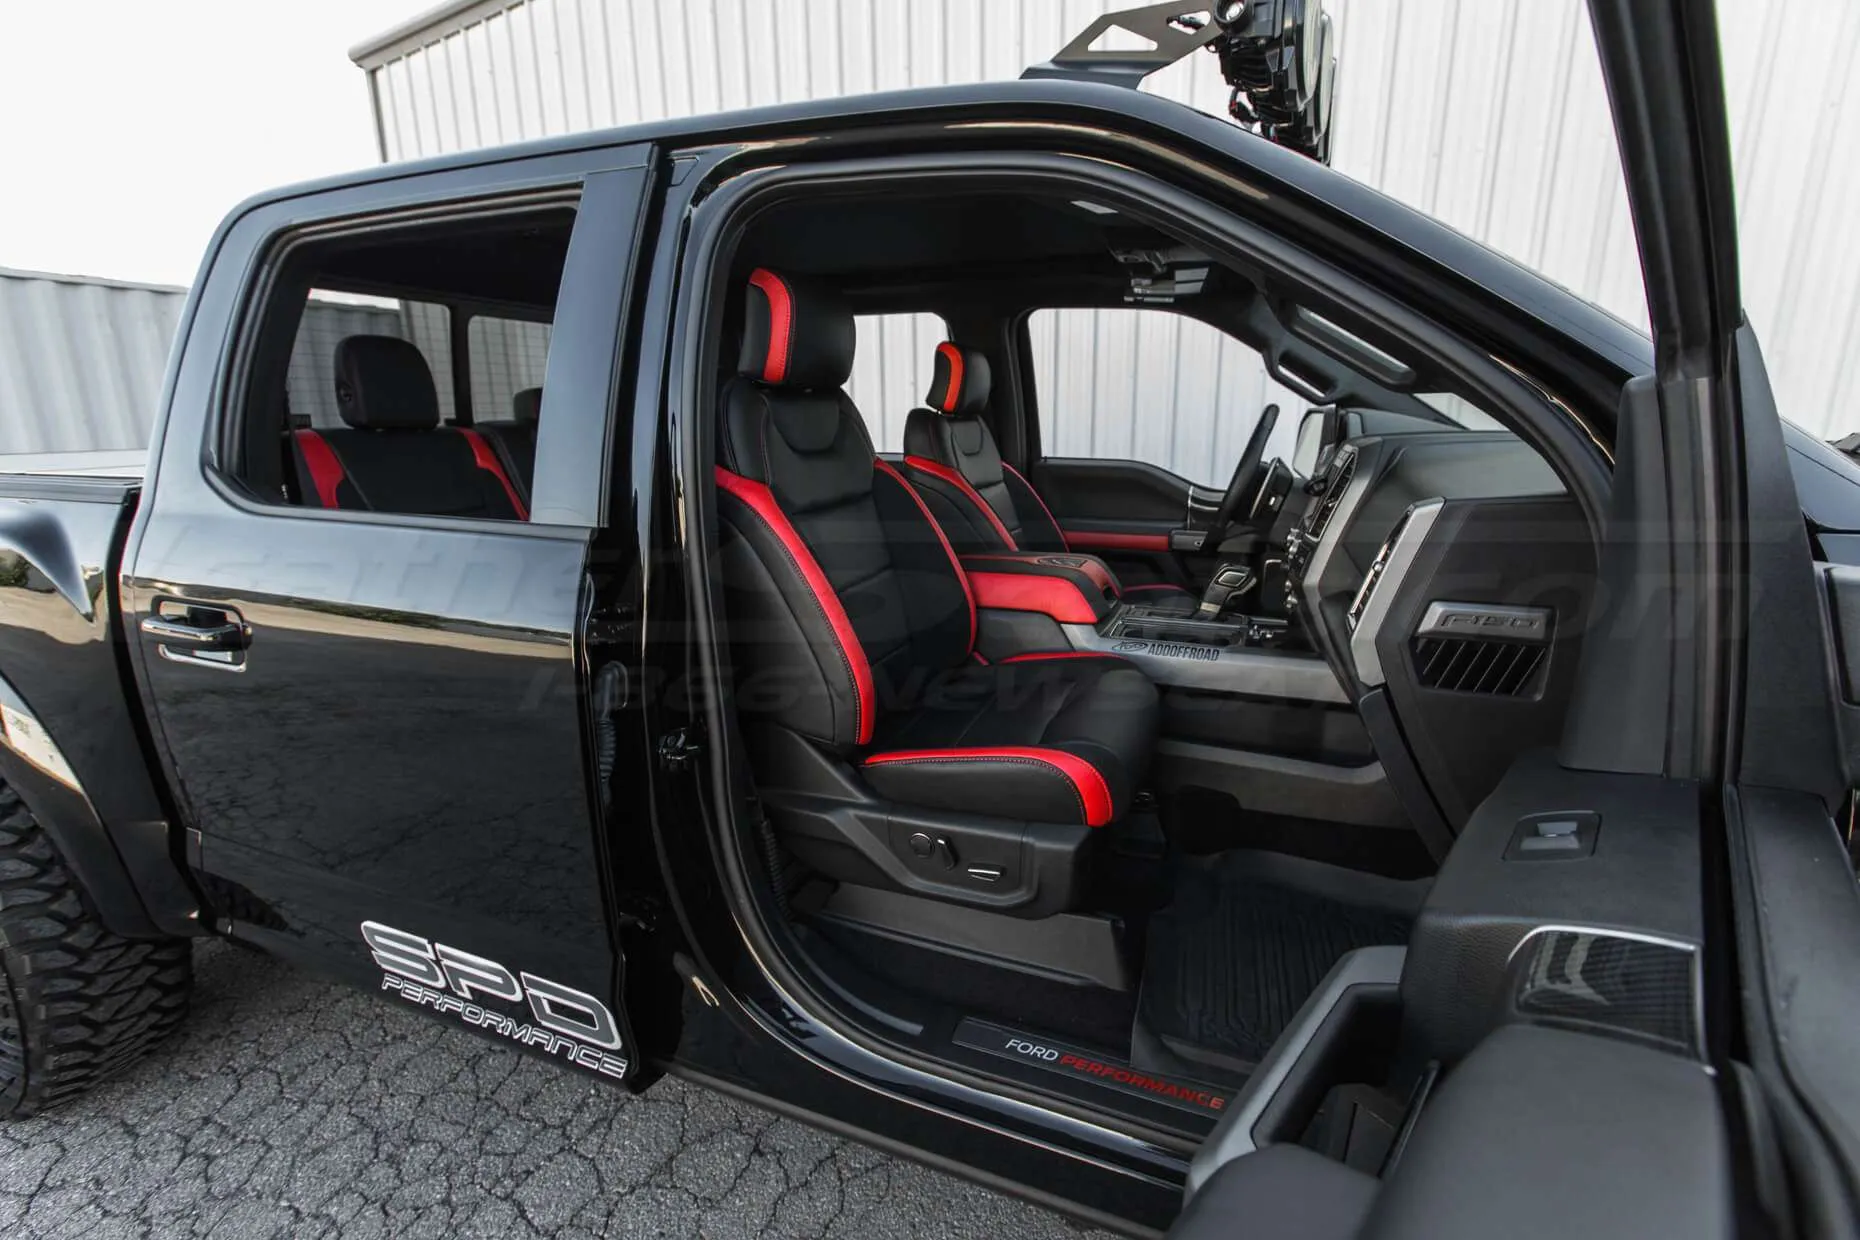 Ford Raptor installed upholstery kit - Black & Bright Red Passenger seat wide angle